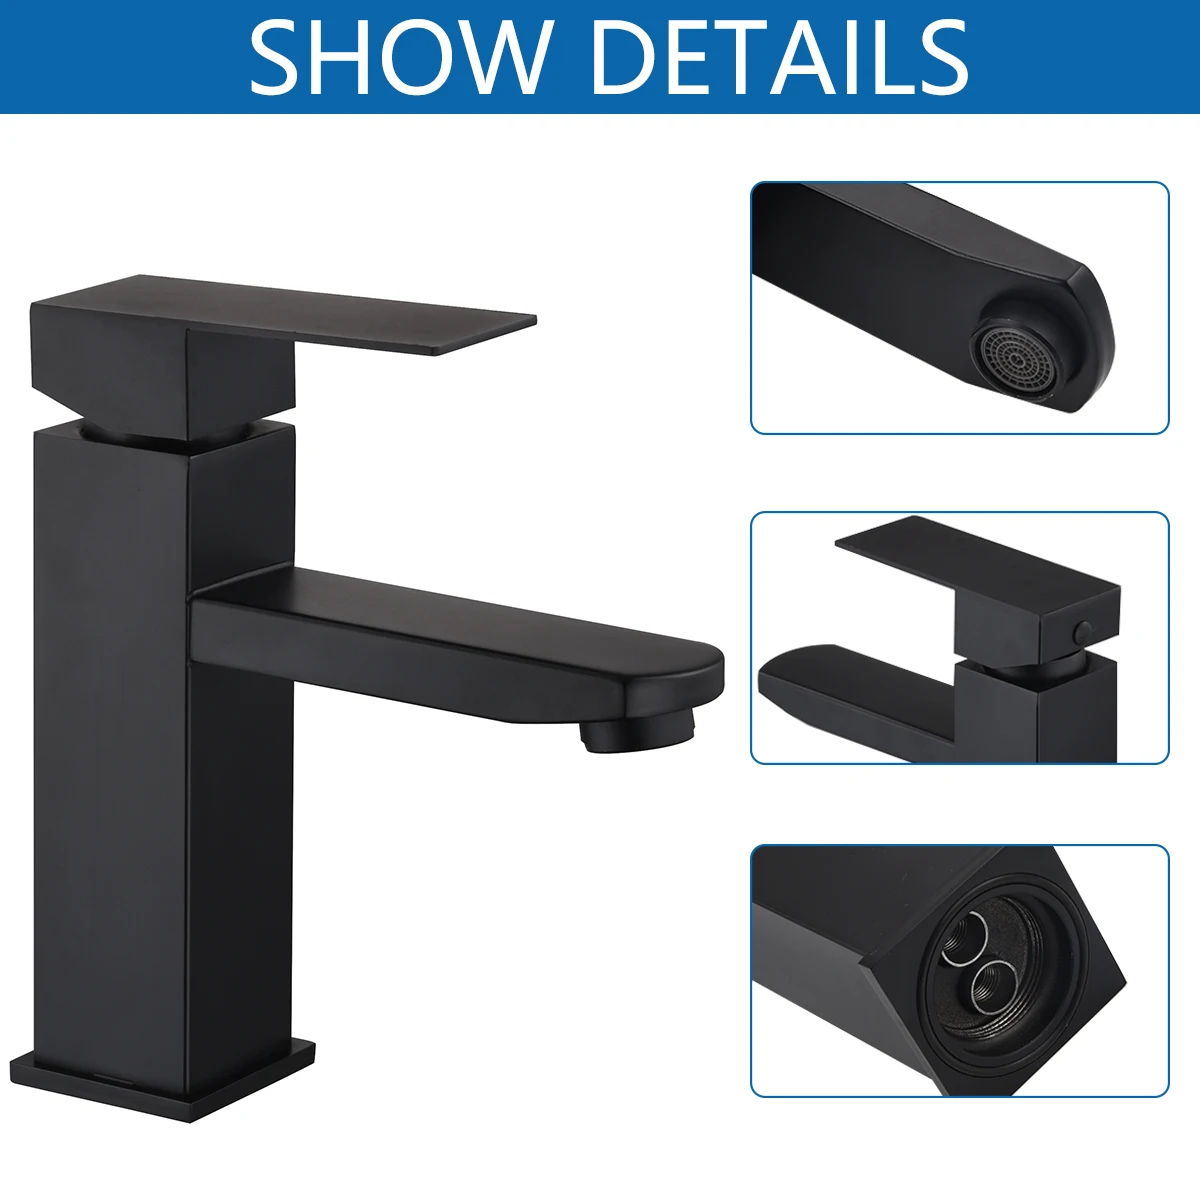 New Basin Sink Bathroom Faucet Deck Mounted Hot Cold Water Stainless Steel Mixer Taps Black/Chrome Lavatory ToiletTap | Обустройство